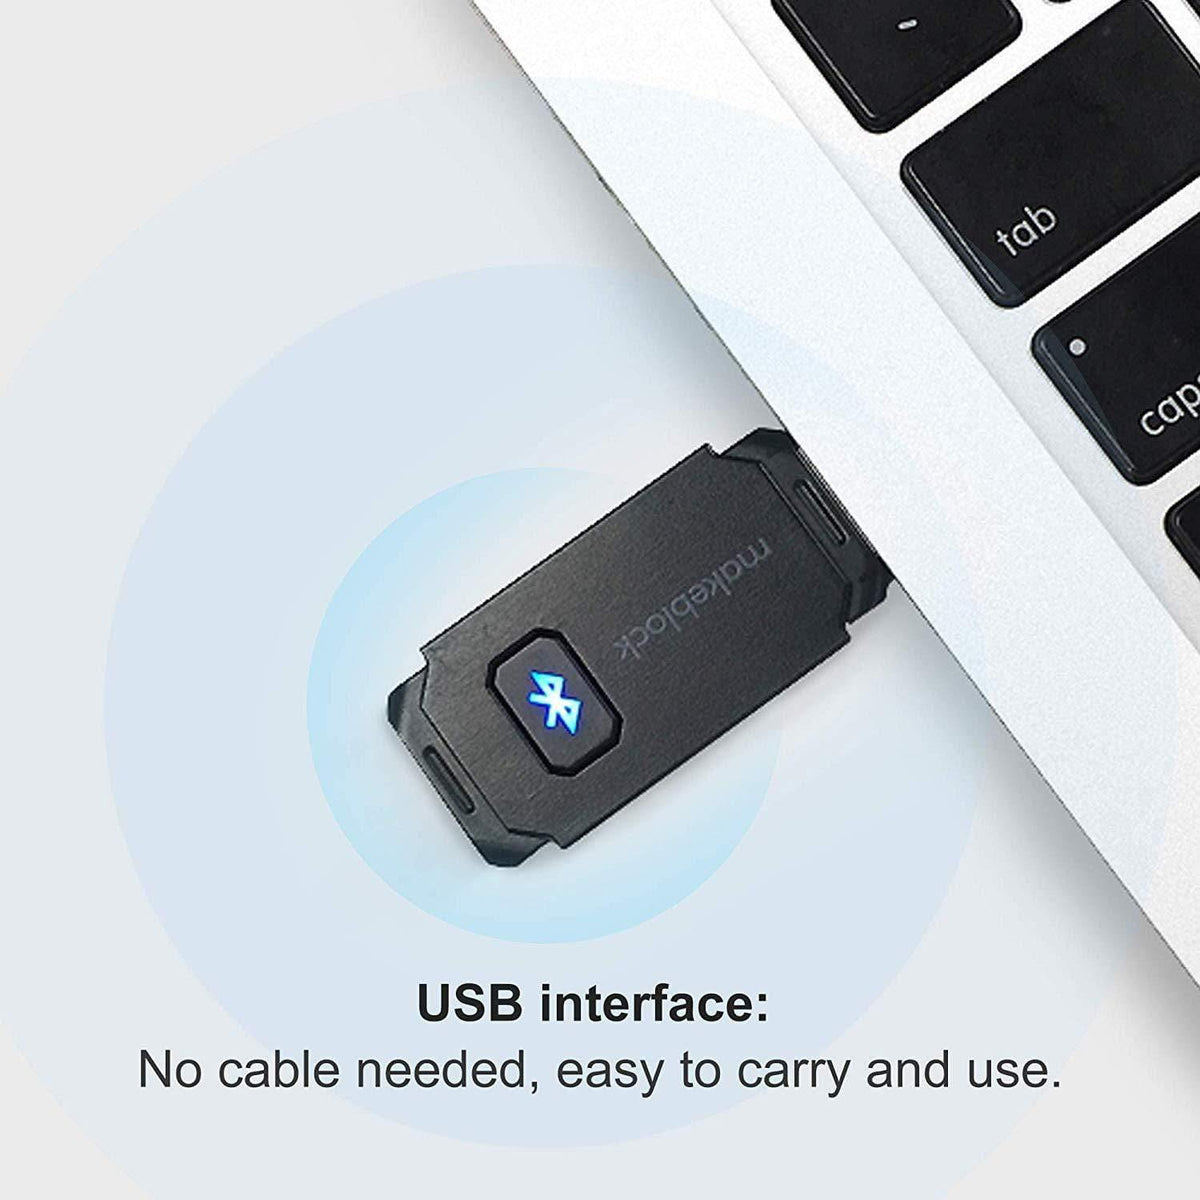 USB 2.0 Bluetooth Adapter, Bluetooth Dongle for PC Connectivity – Makeblock